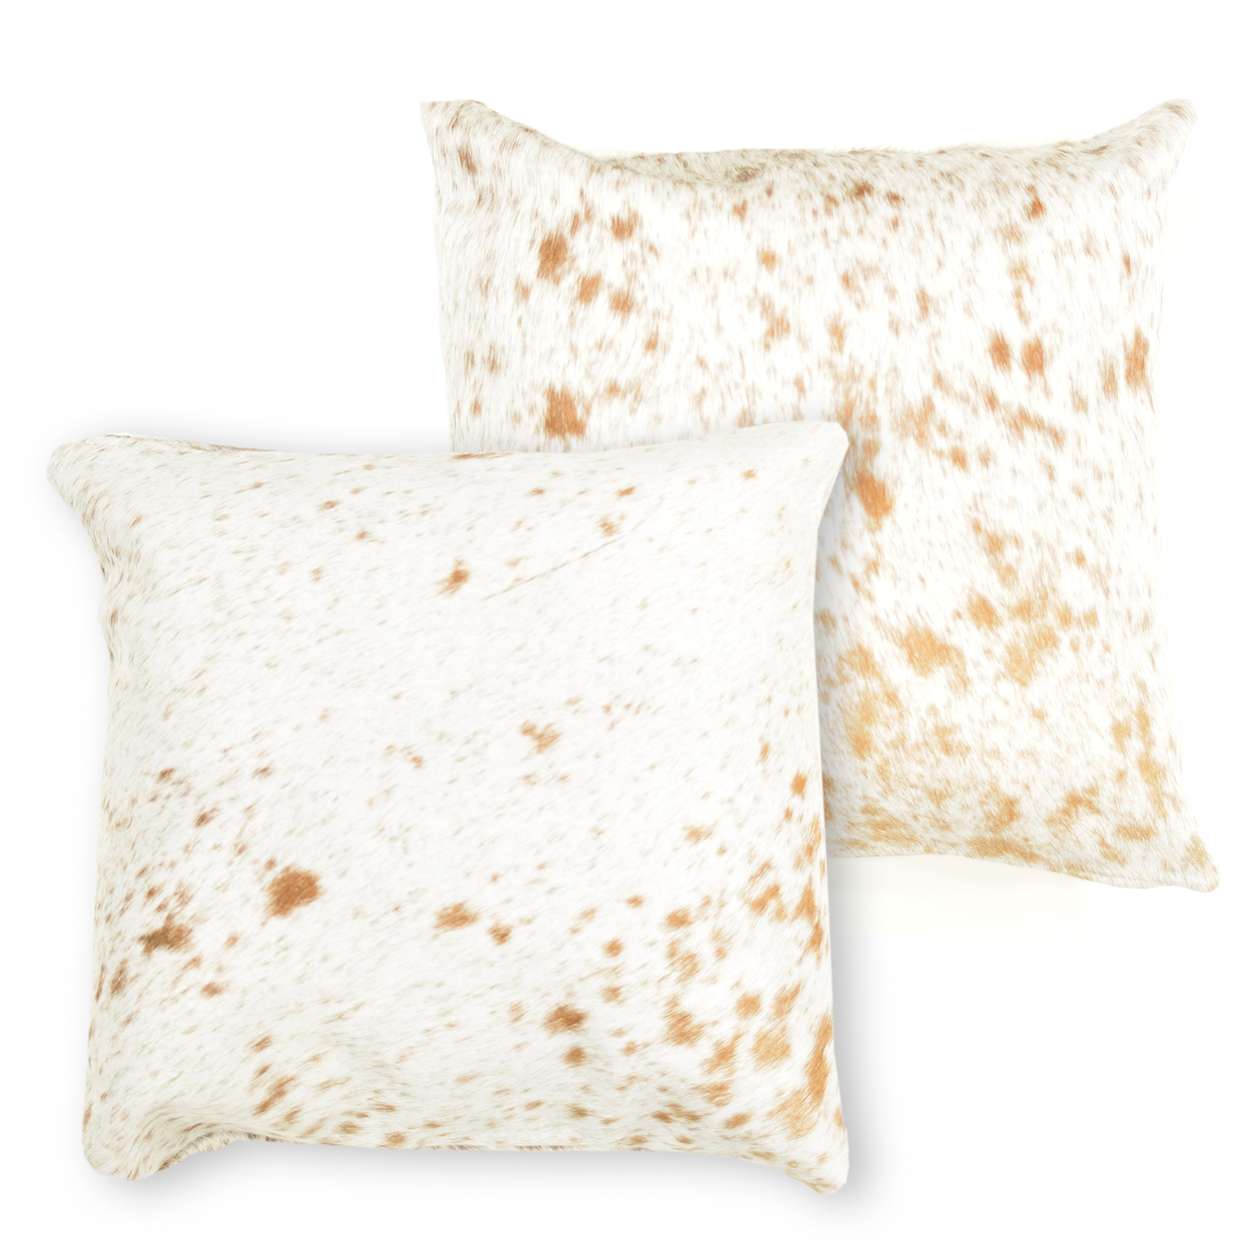 322056 - 15in Premium Cowhide Pillow - Salt and Pepper Brown 2 Sides